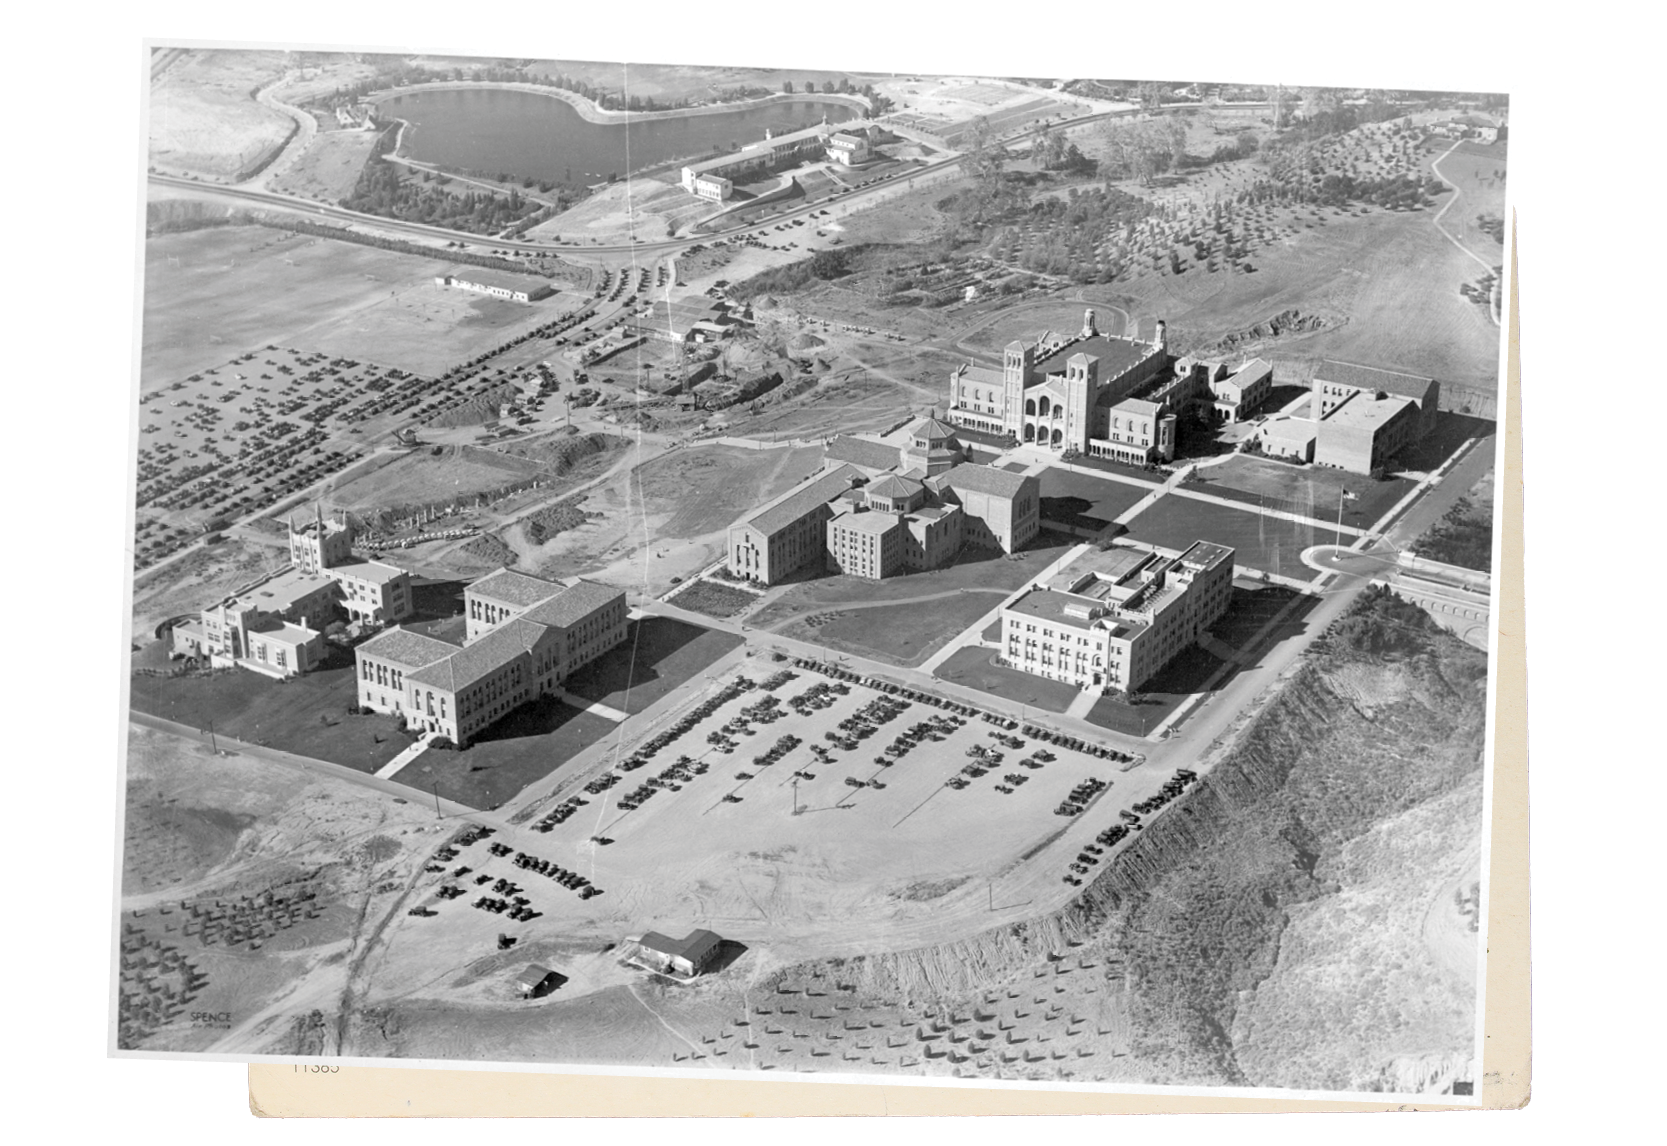 A black and white aerial photograph of UCLA's Westwood campus taken in the 1930s.